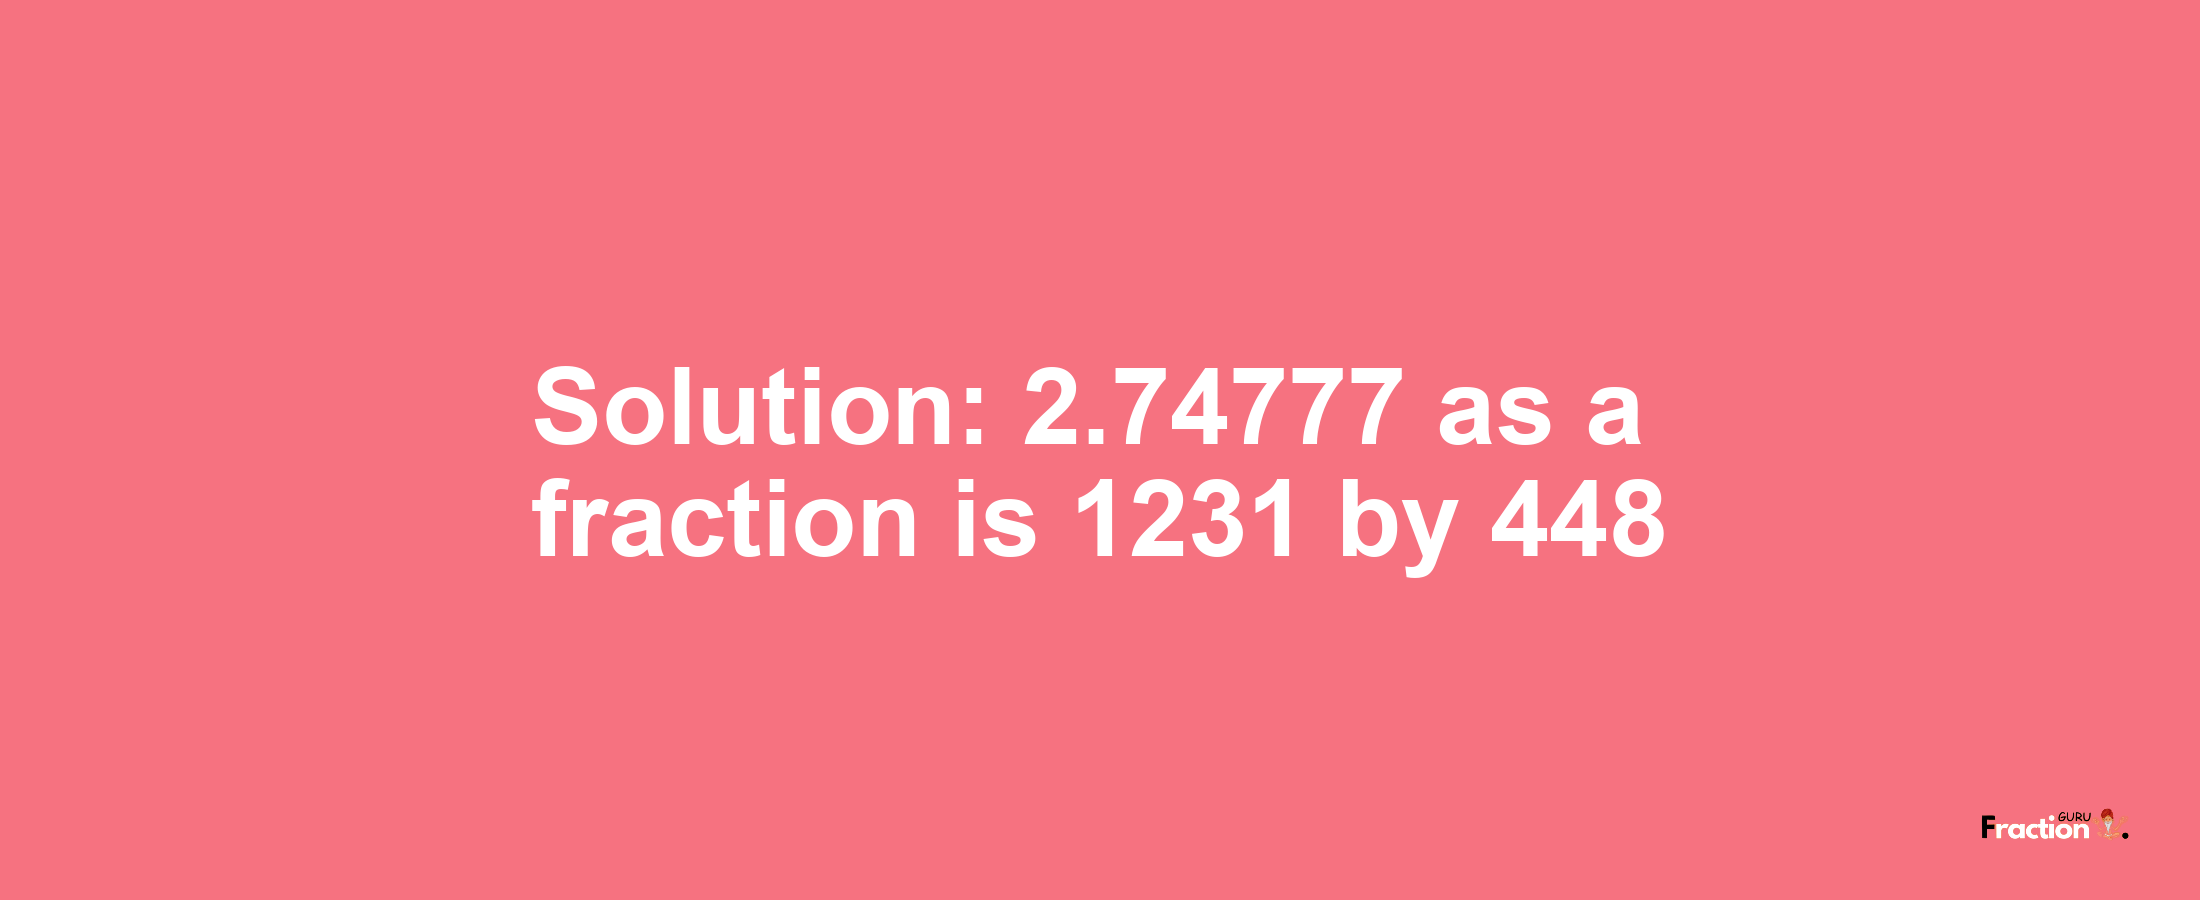 Solution:2.74777 as a fraction is 1231/448